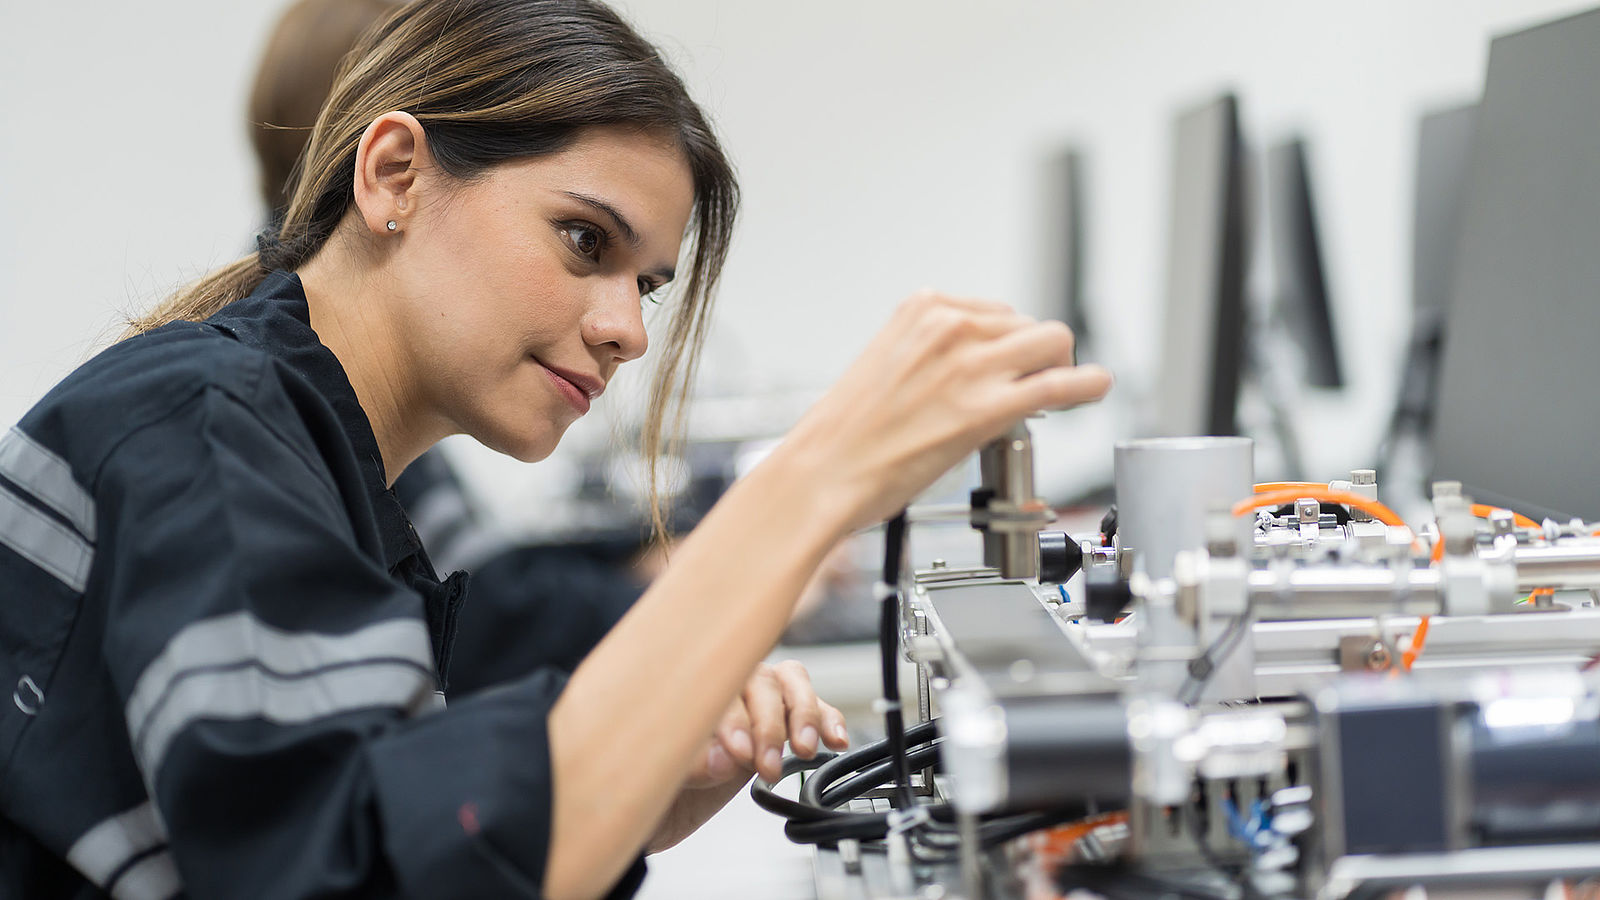 Student of the Master’s degree programme in mechatronics in front of the experimental set-up